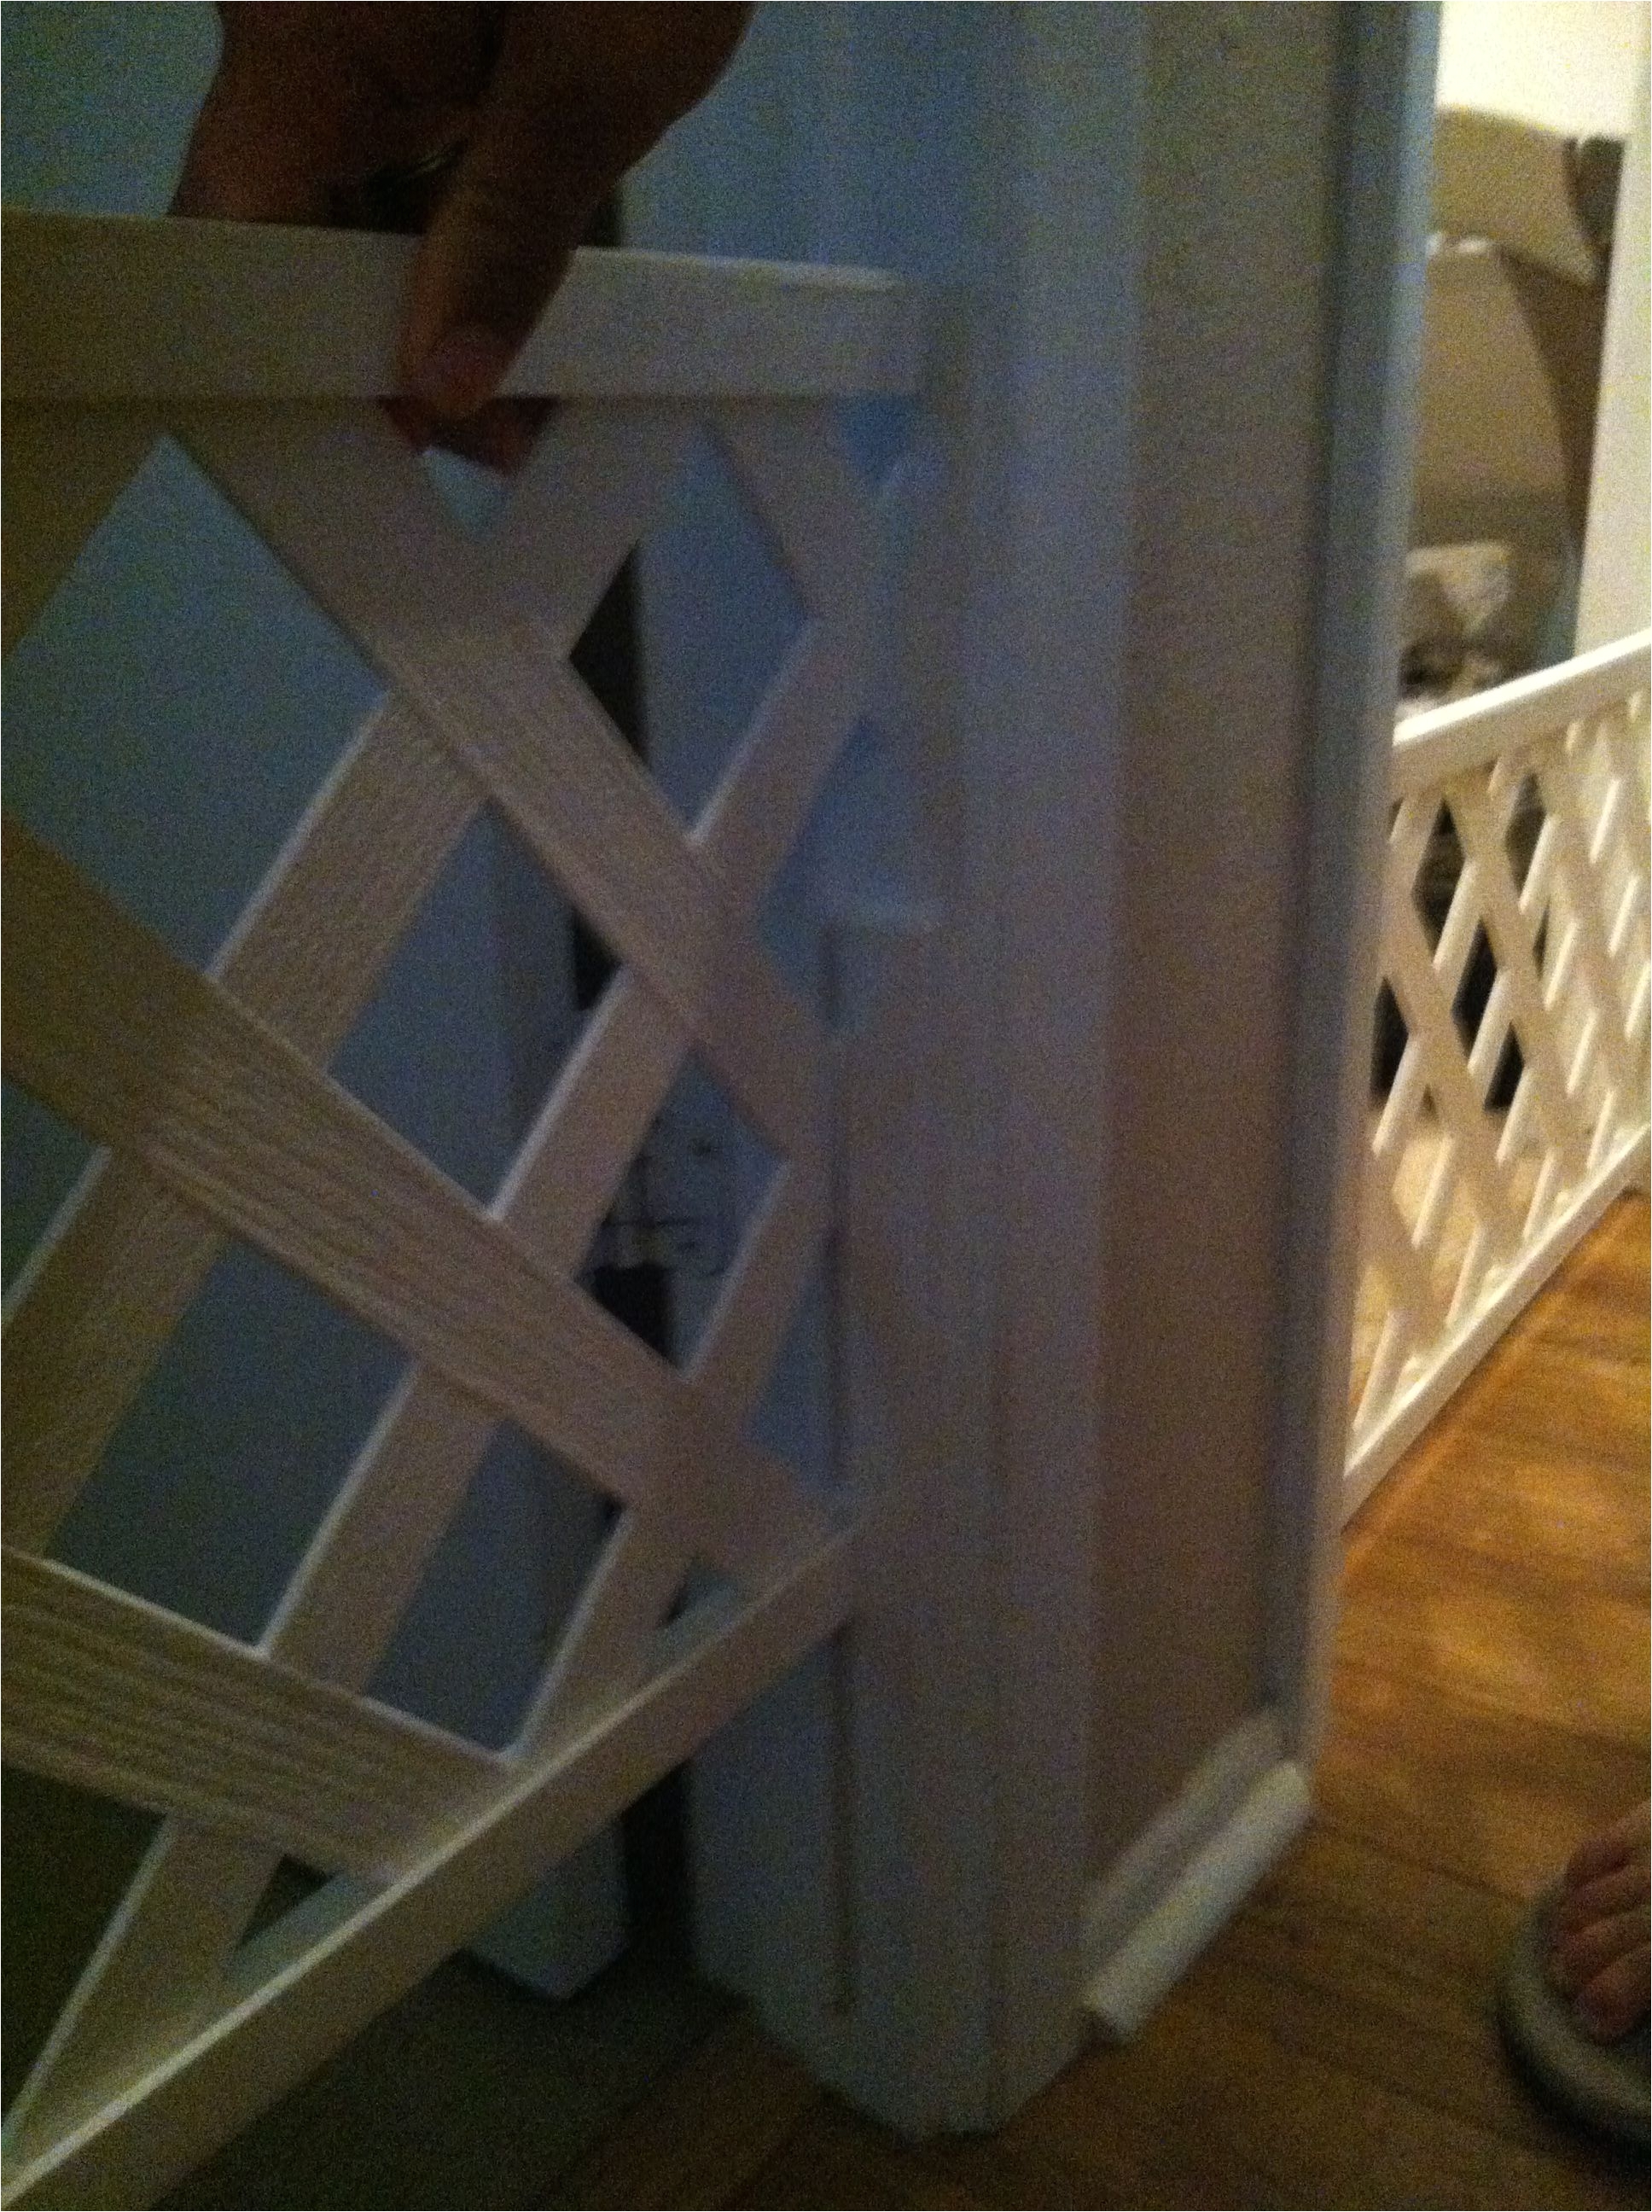 easy diy dog gate lattice work and apply a piace of wood to the door so it slides up and down